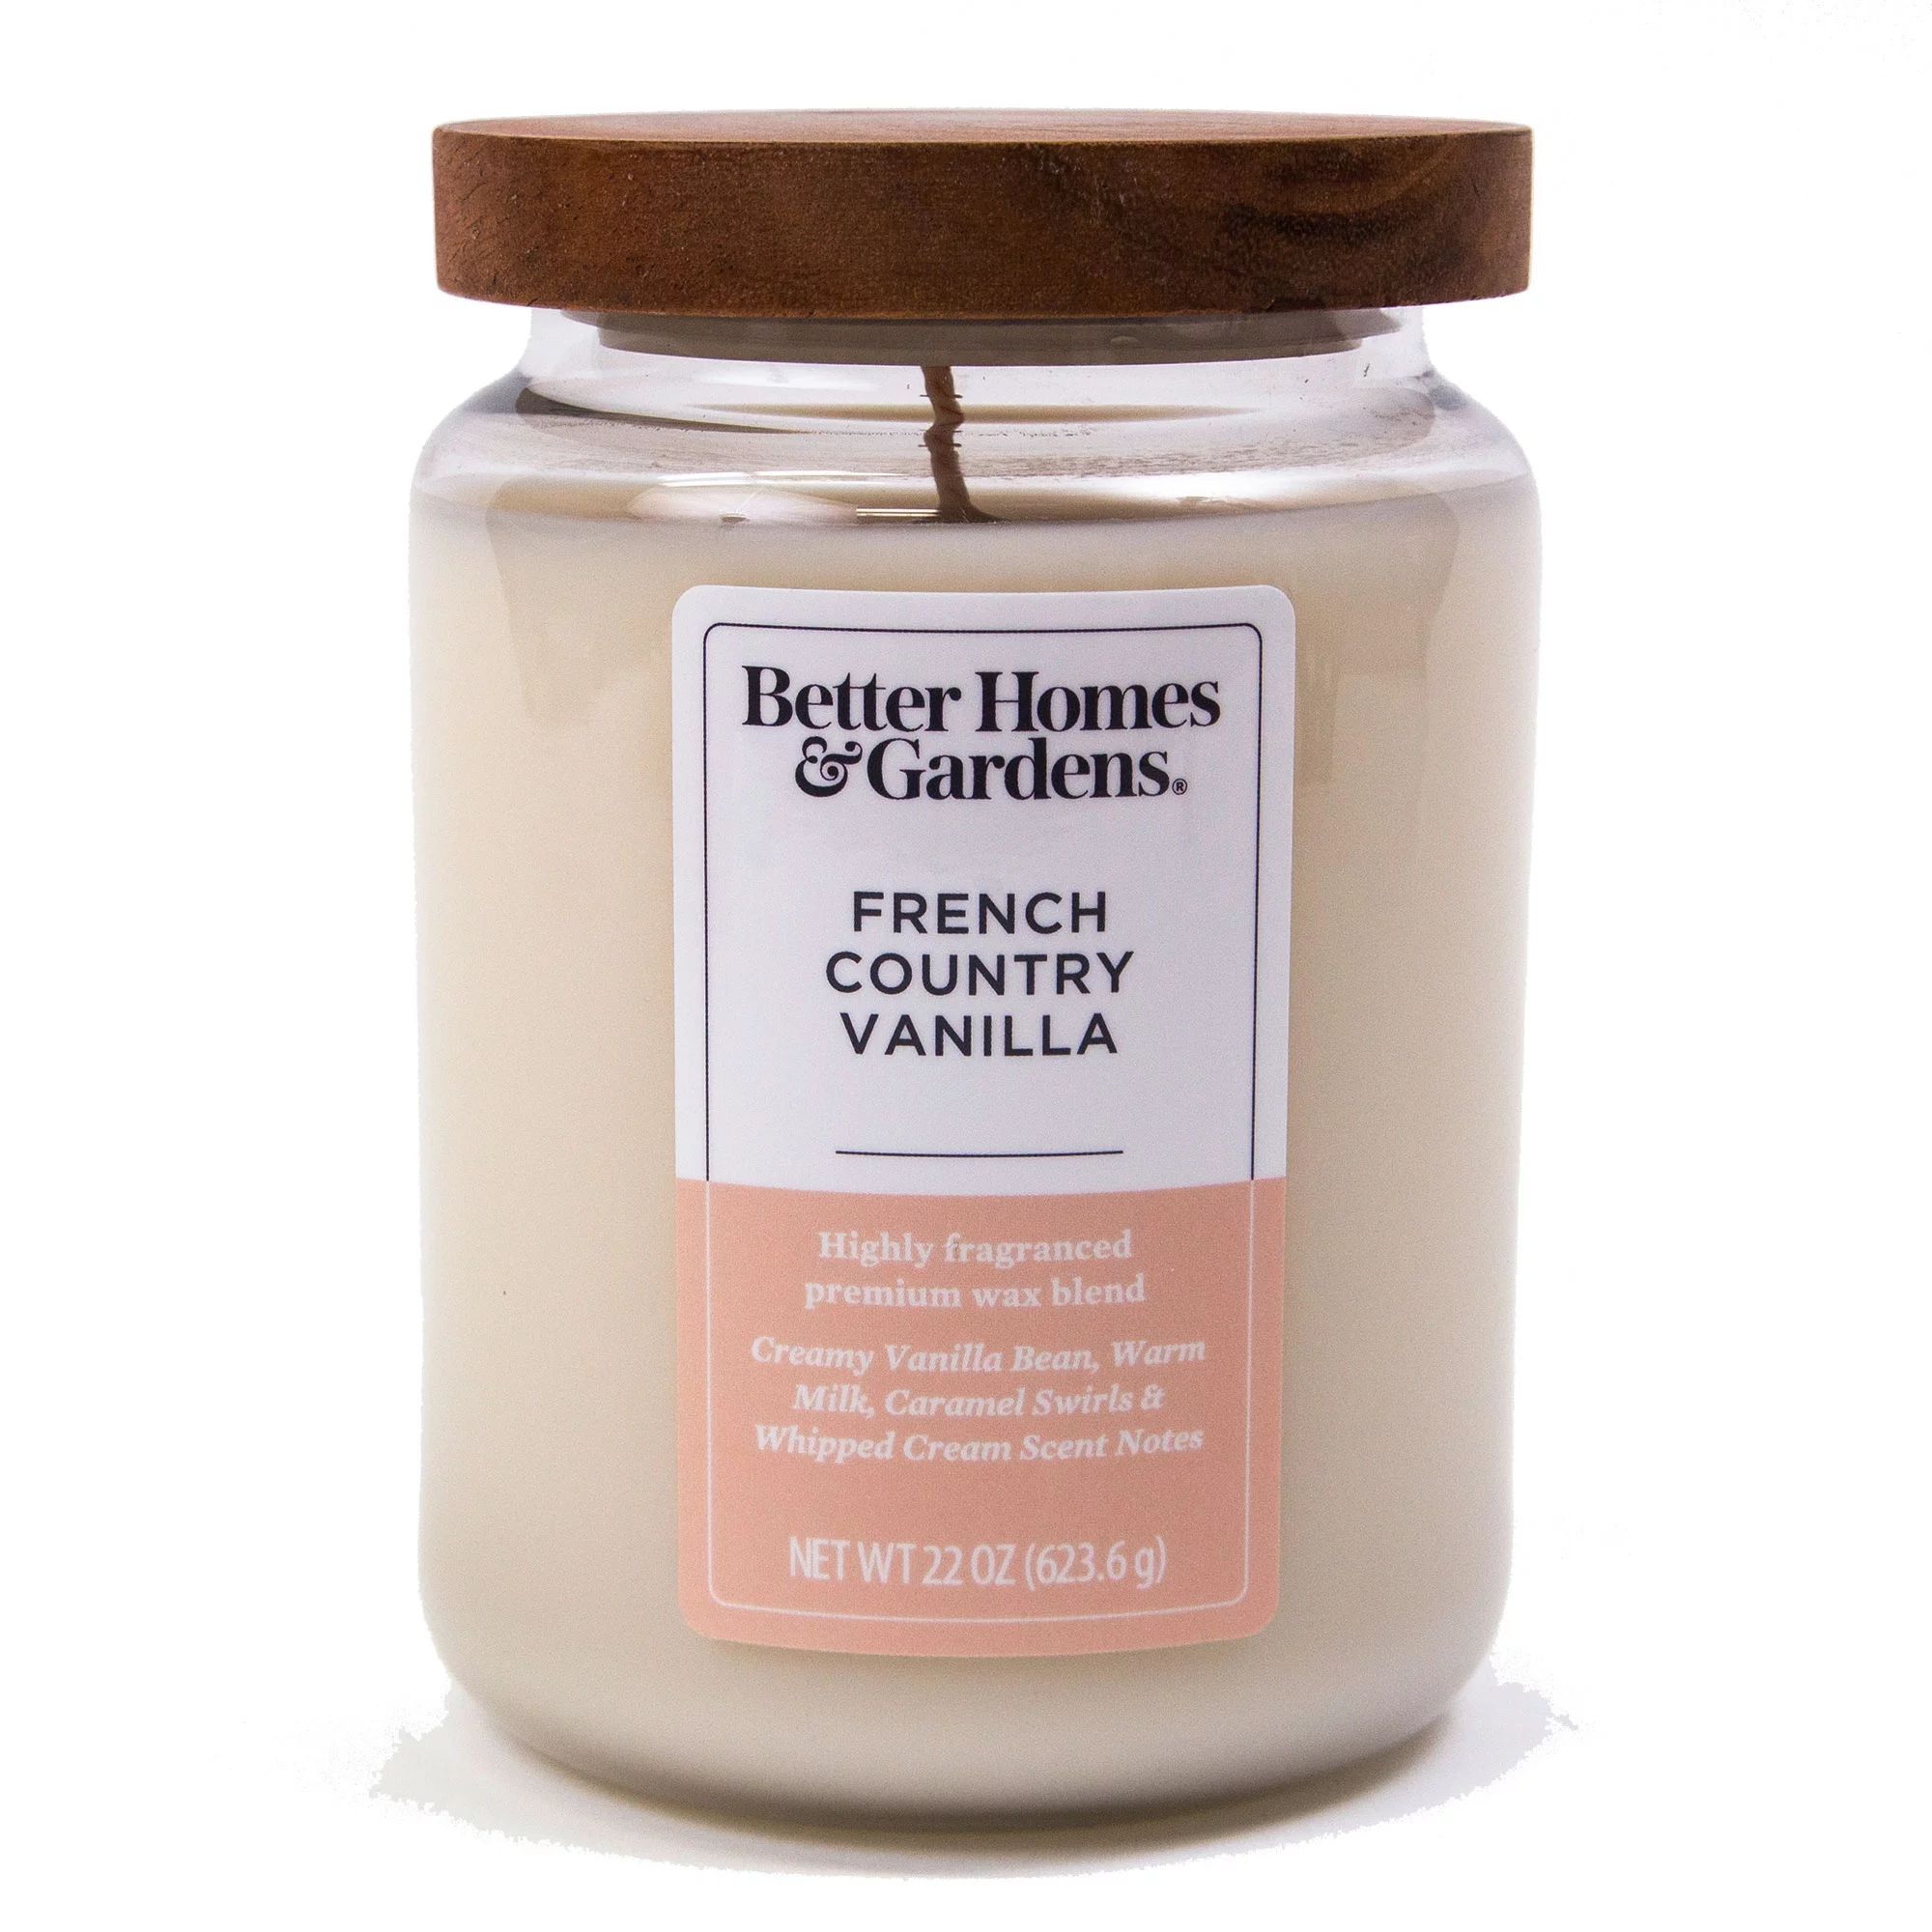 Better Homes & Gardens French Country Vanilla Scented Single-Wick Large Glass Jar Candle, 22 oz. | Walmart (US)